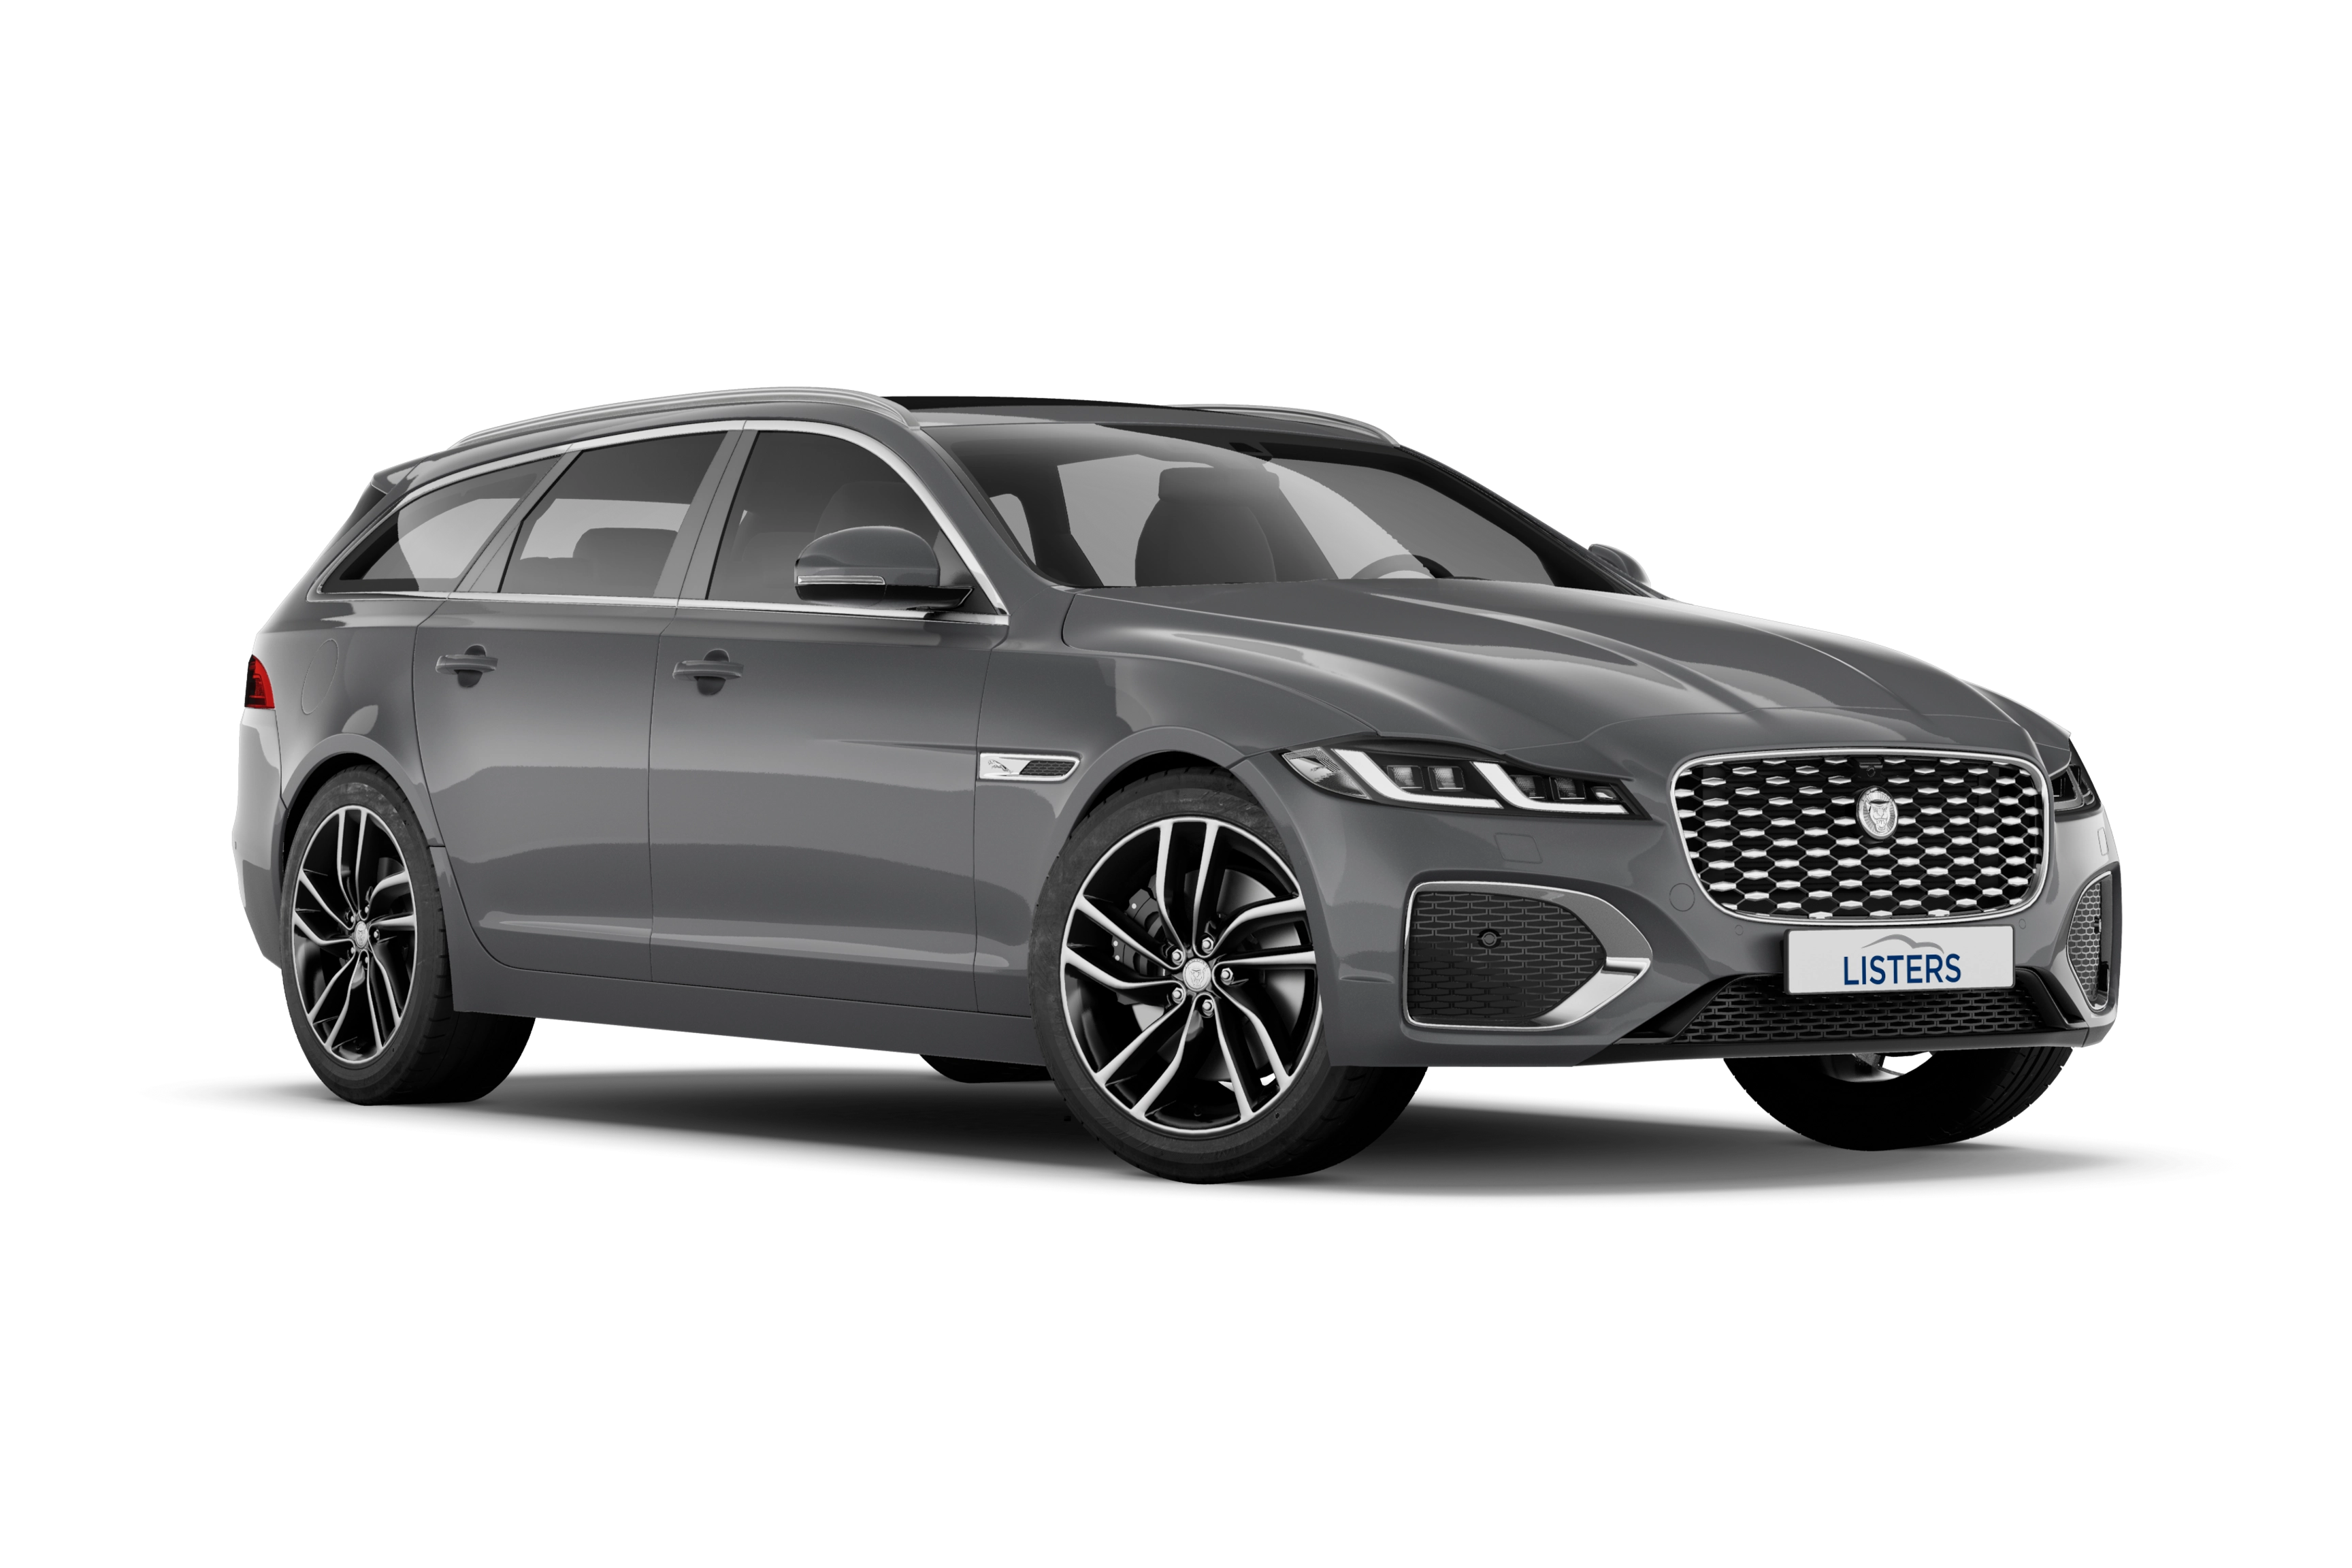 Jaguar XF Contract Hire & Leasing Offers